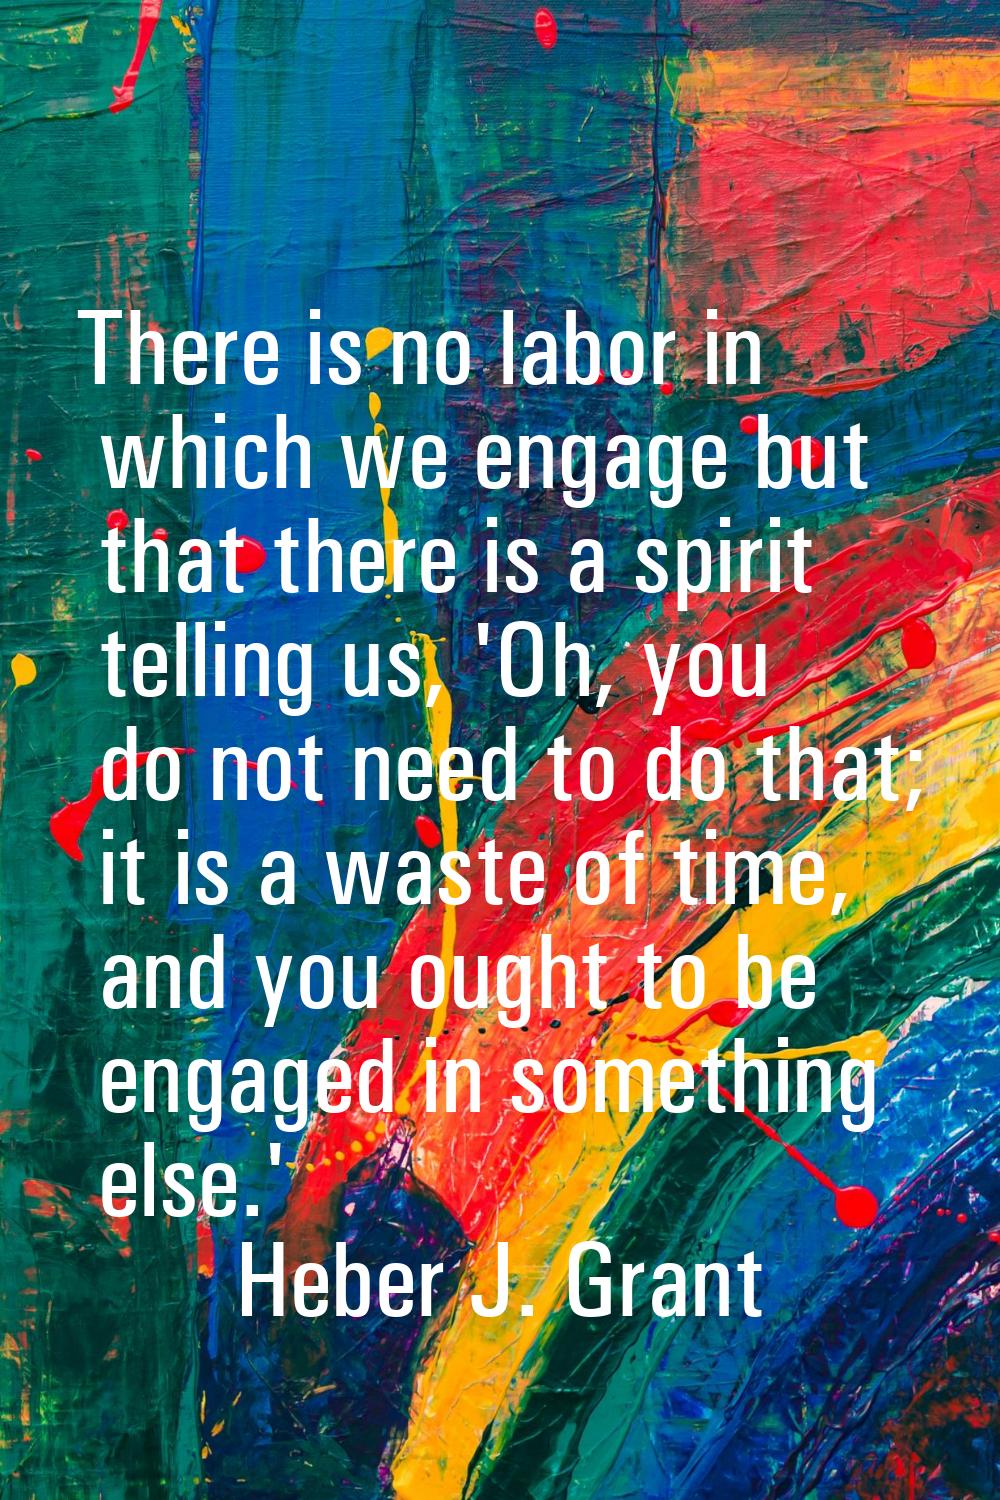 There is no labor in which we engage but that there is a spirit telling us, 'Oh, you do not need to